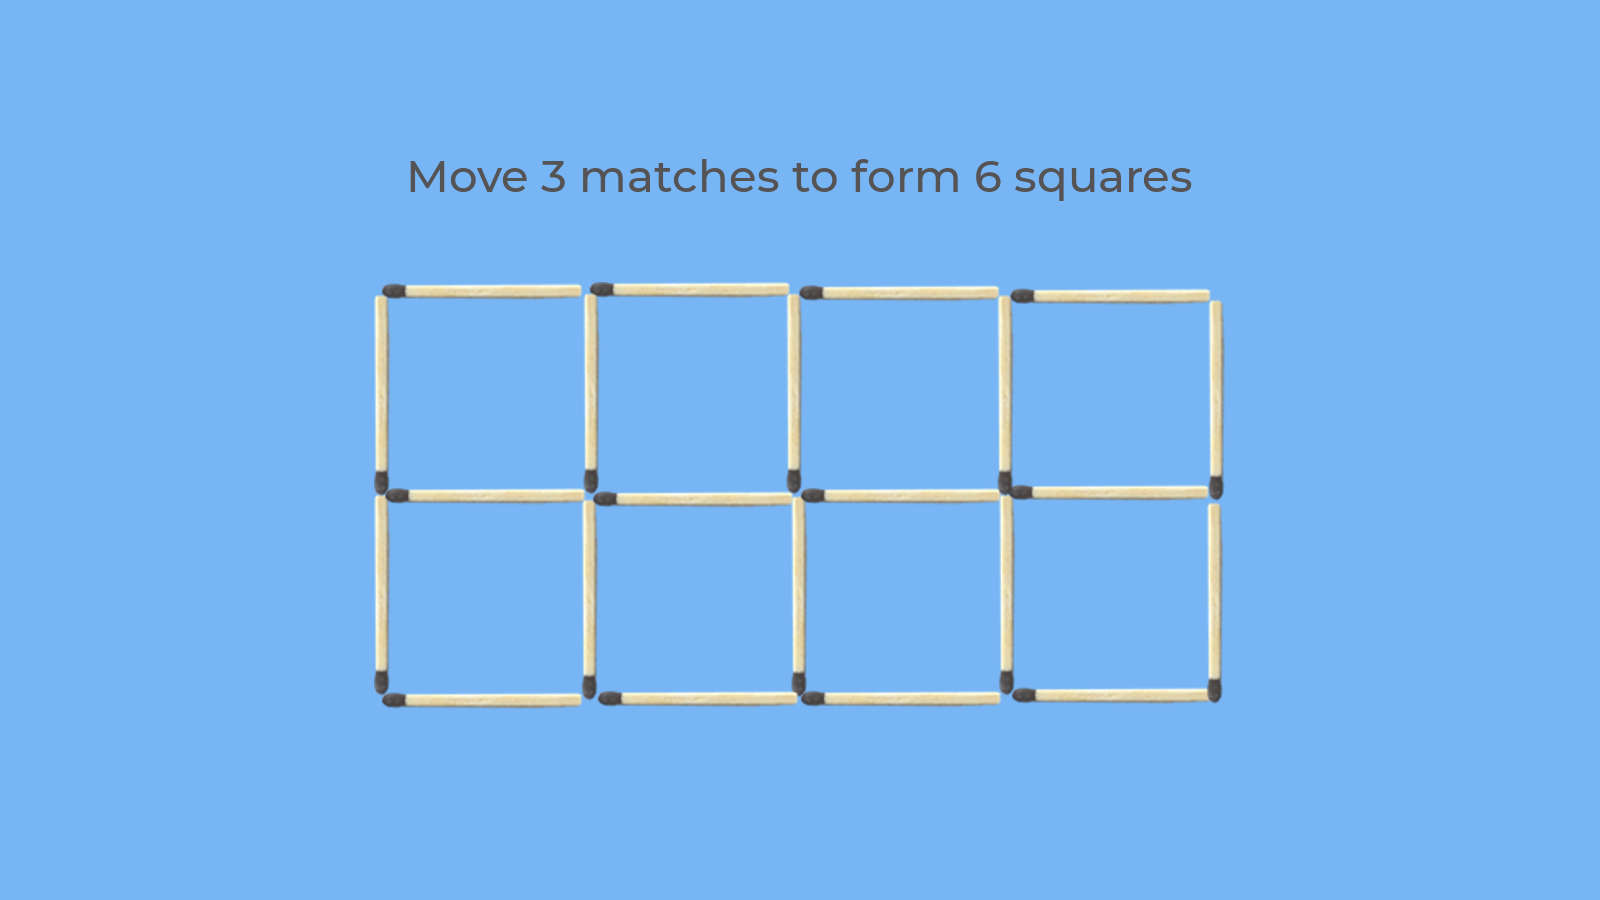 Move 3 matches to form 6 squares matchstick puzzle